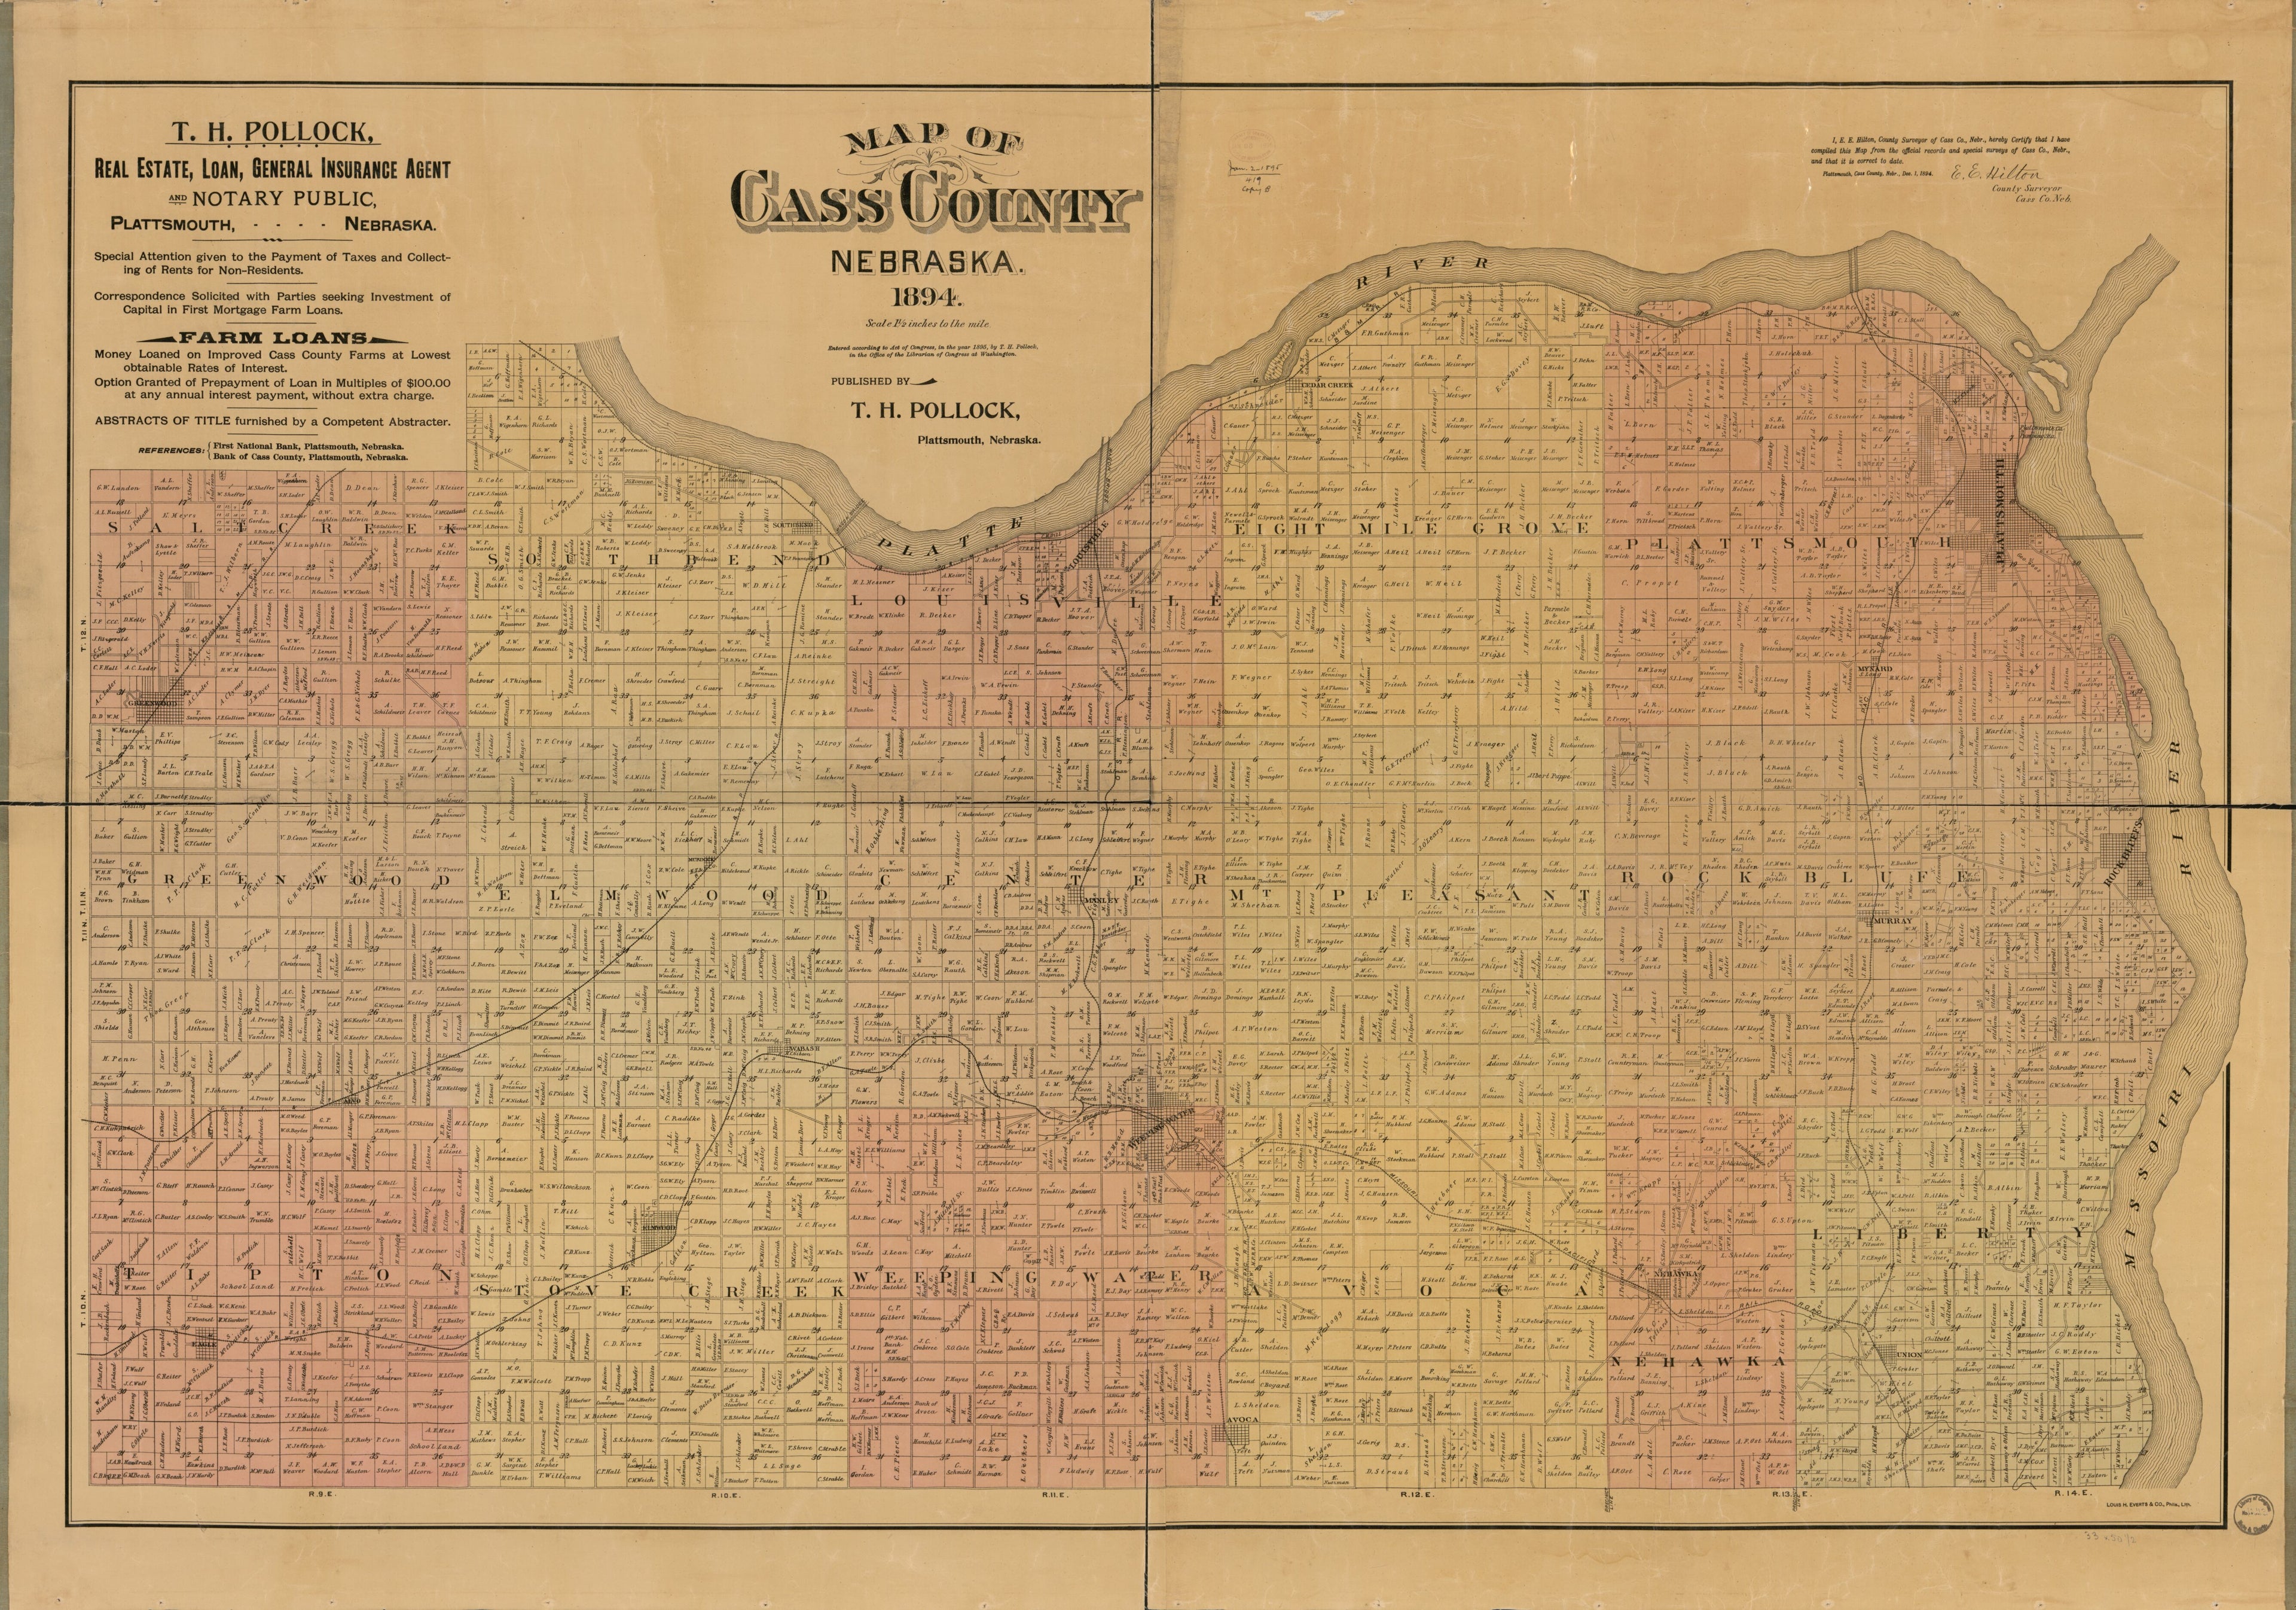 This old map of Map of Cass County, Nebraska from 1894 was created by T. H. Pollock in 1894